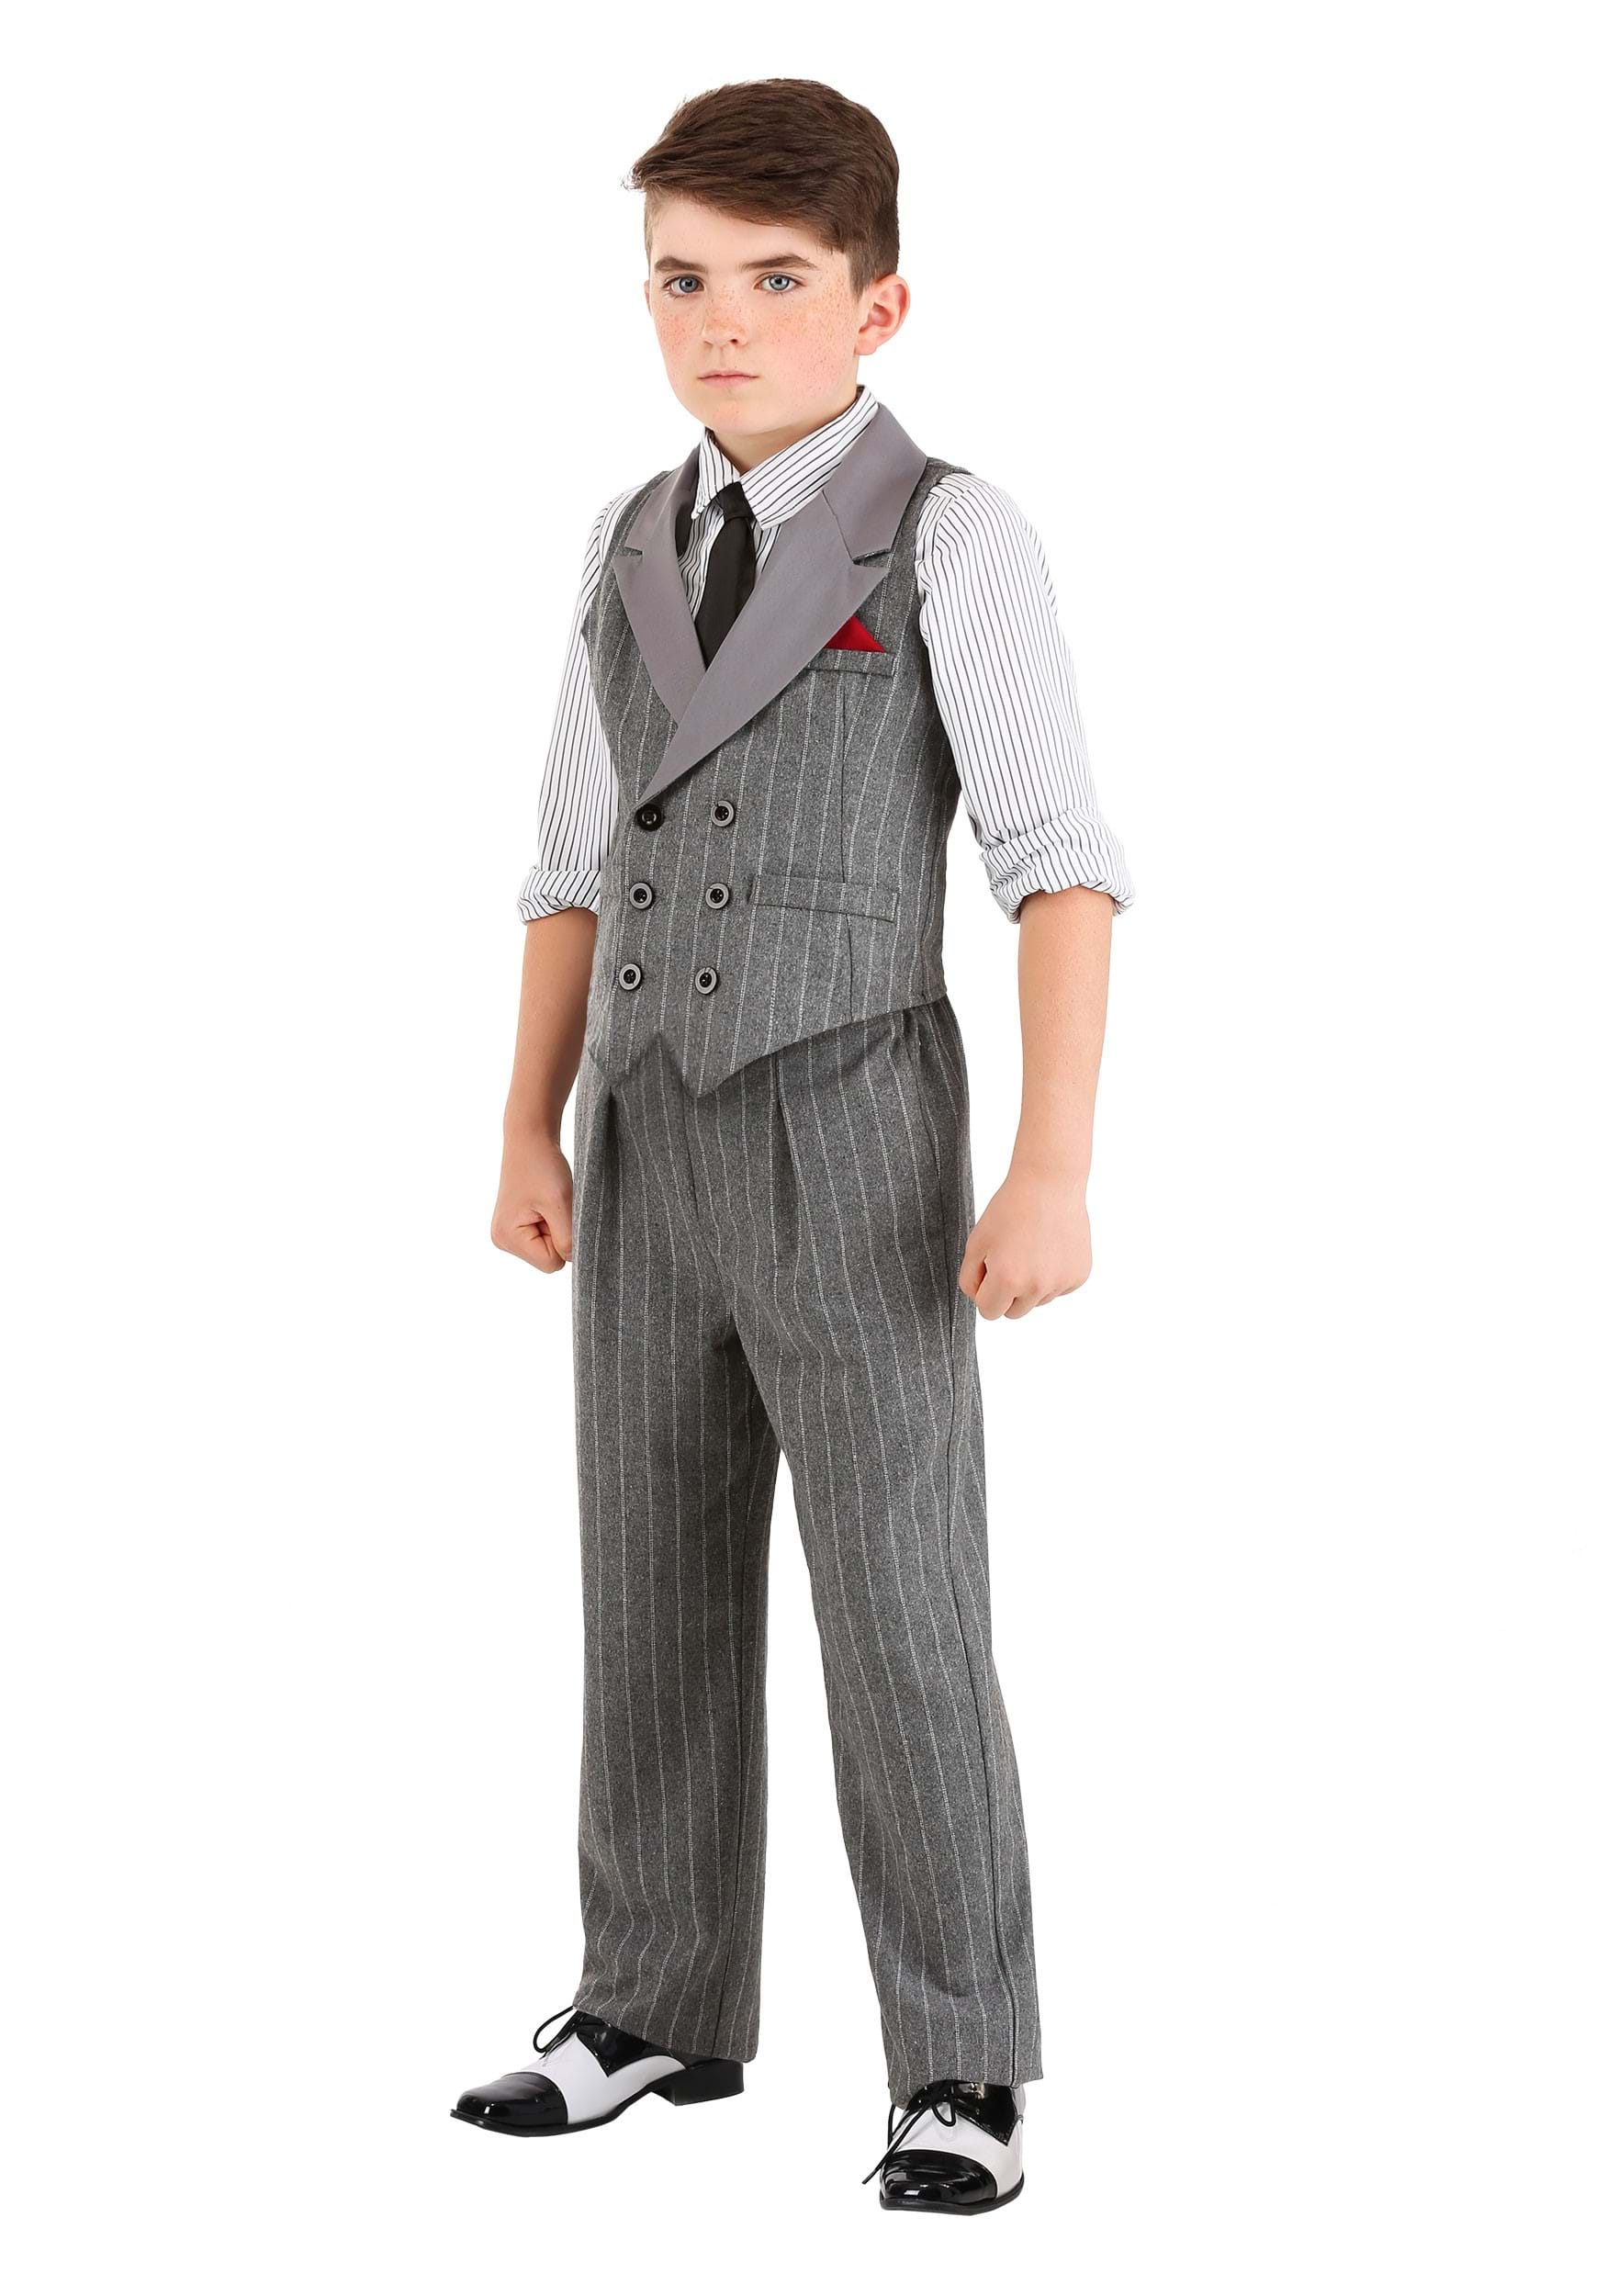 Ruthless Gangster Costume For Kids , Child Decade Costumes